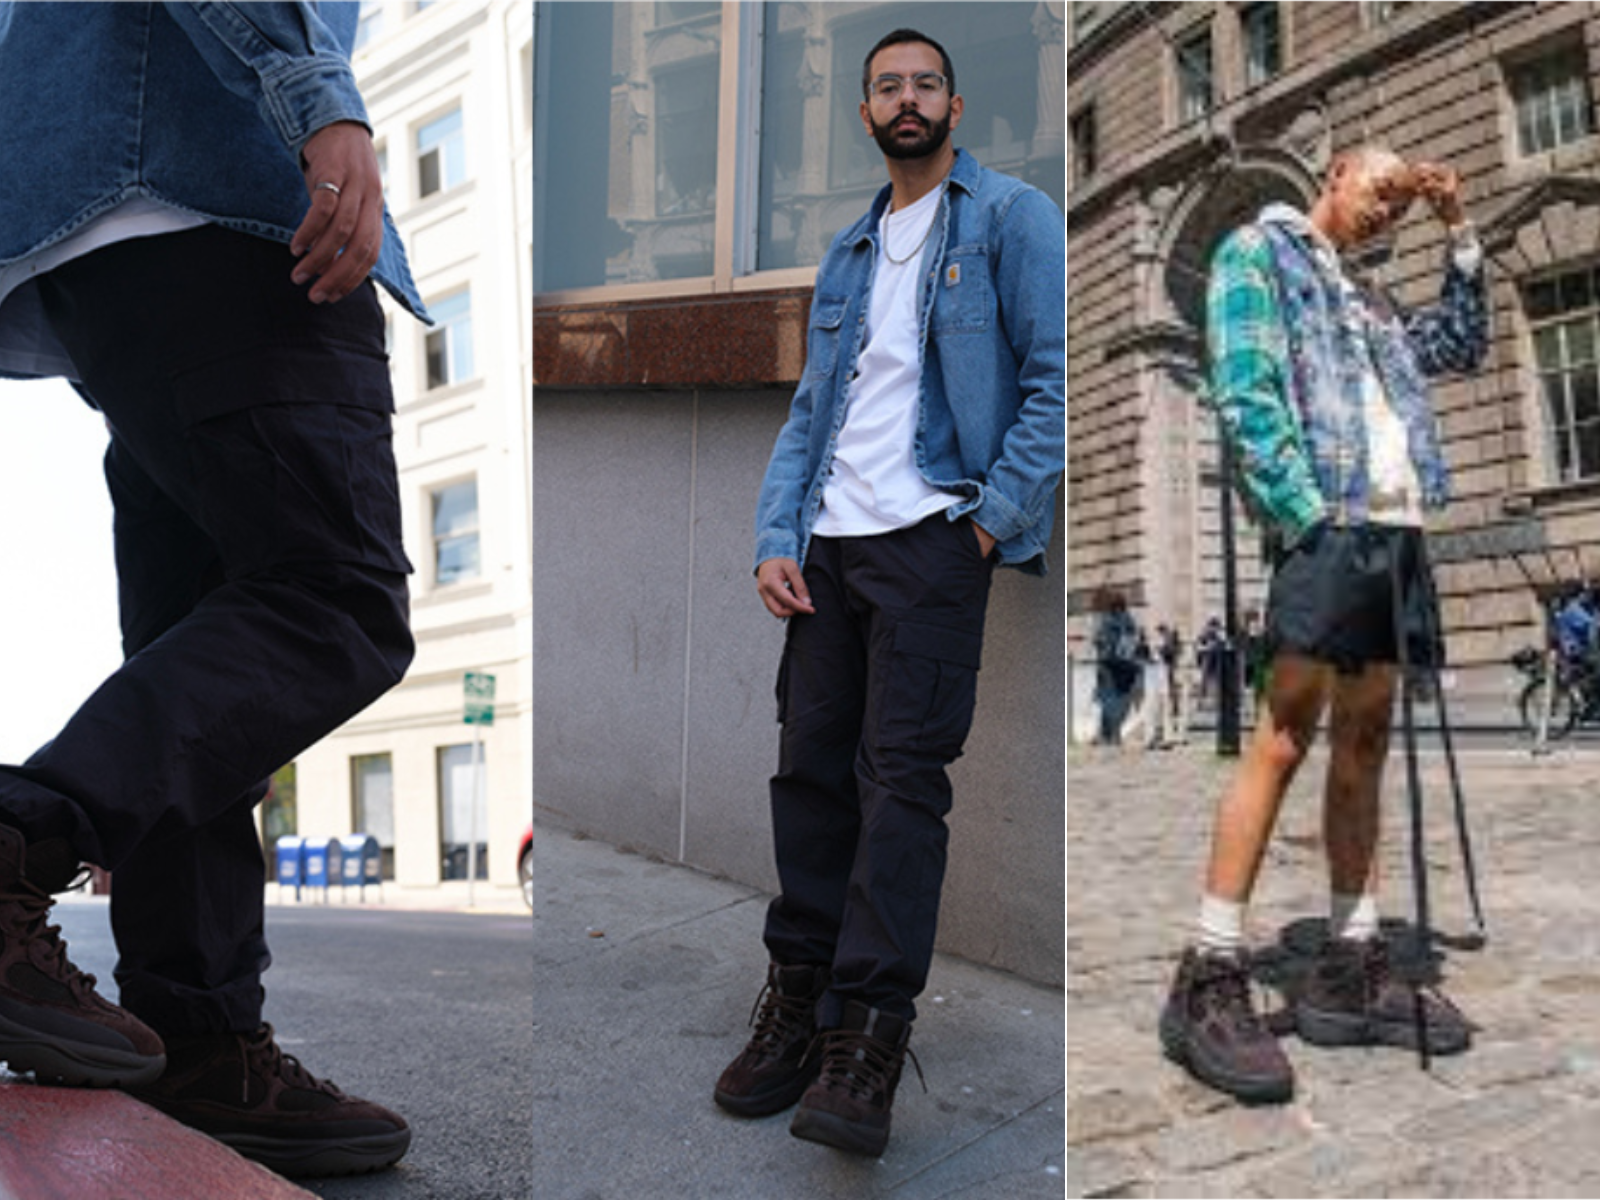 Men wearing Yeezy boots in 3 different pictures